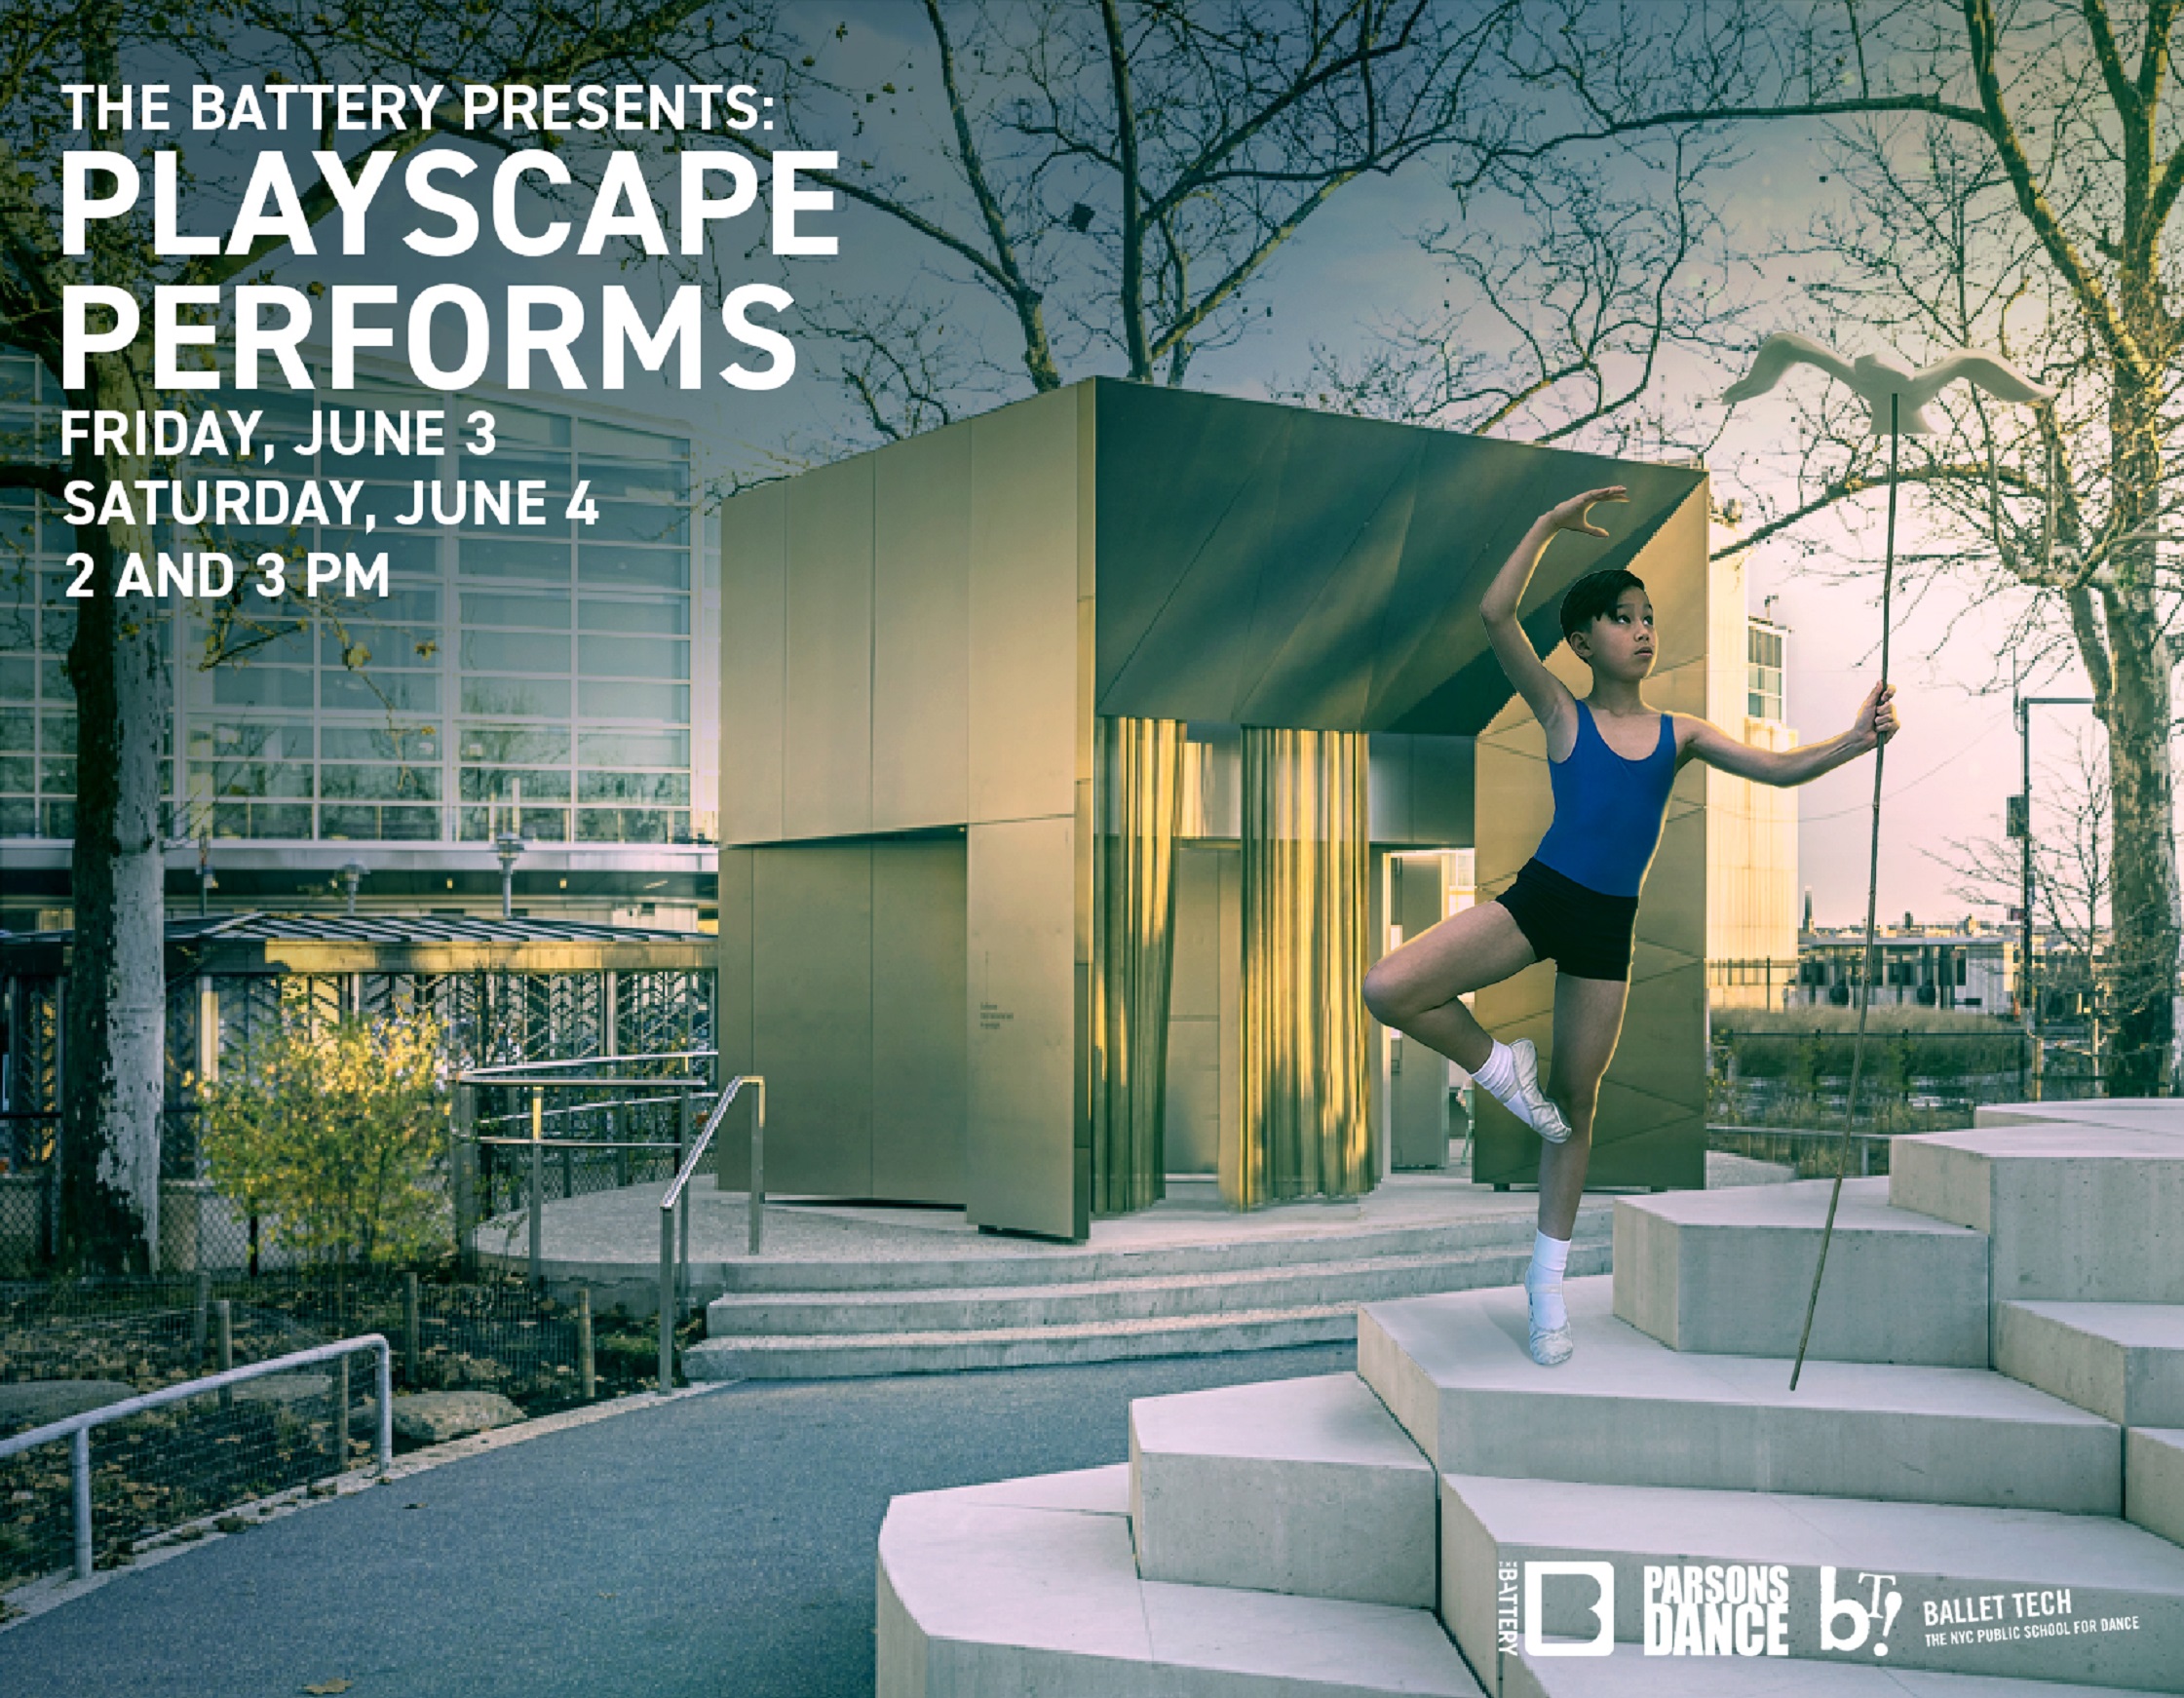 The Battery Kicks Off “Playscape Performs” with a Unique Collaboration between Parsons Dance and Ballet Tech, Inspired by the Park’s Innovative New Playground